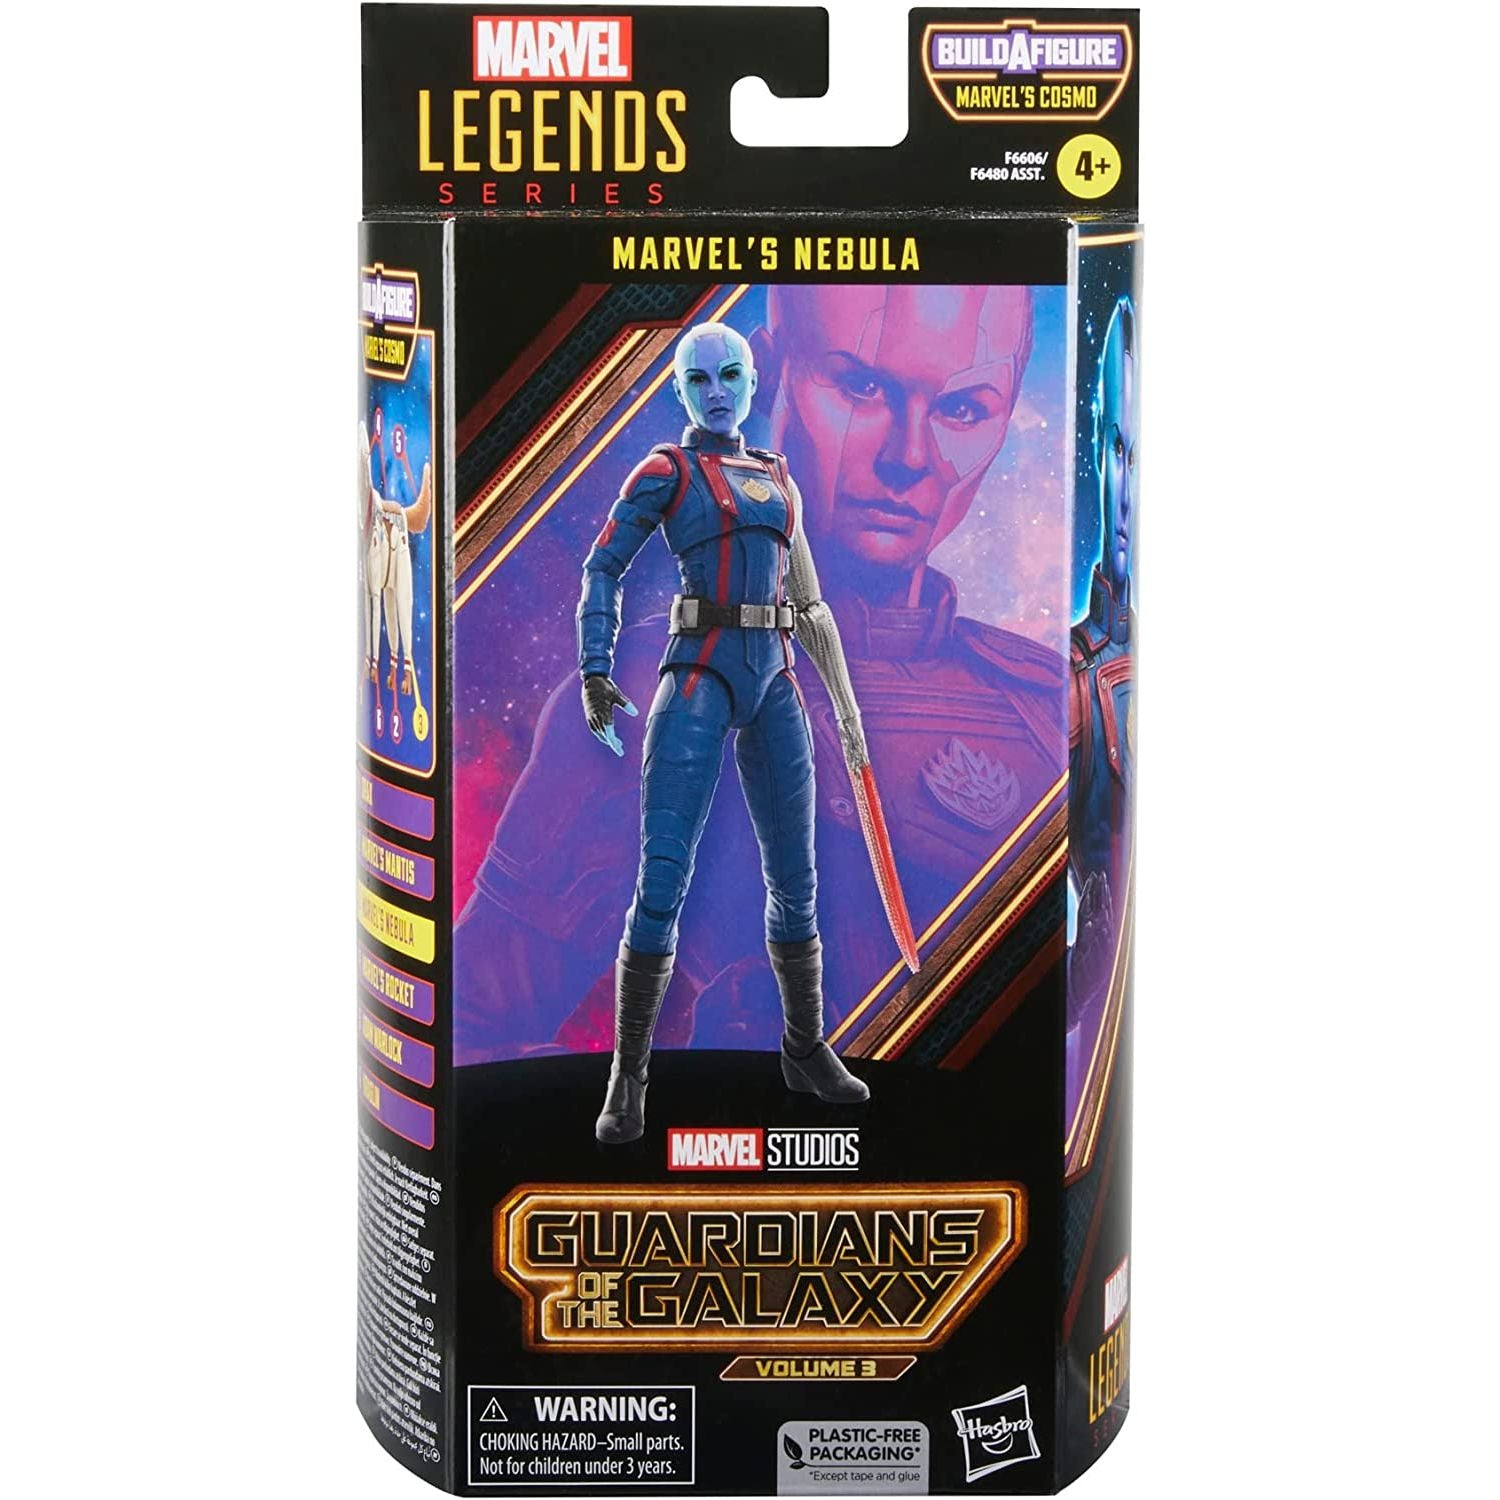  Guardians of the Galaxy Vol. 3 Marvel Legends Nebula 6-Inch Action Figure Toy in a box front view- Heretoserveyou